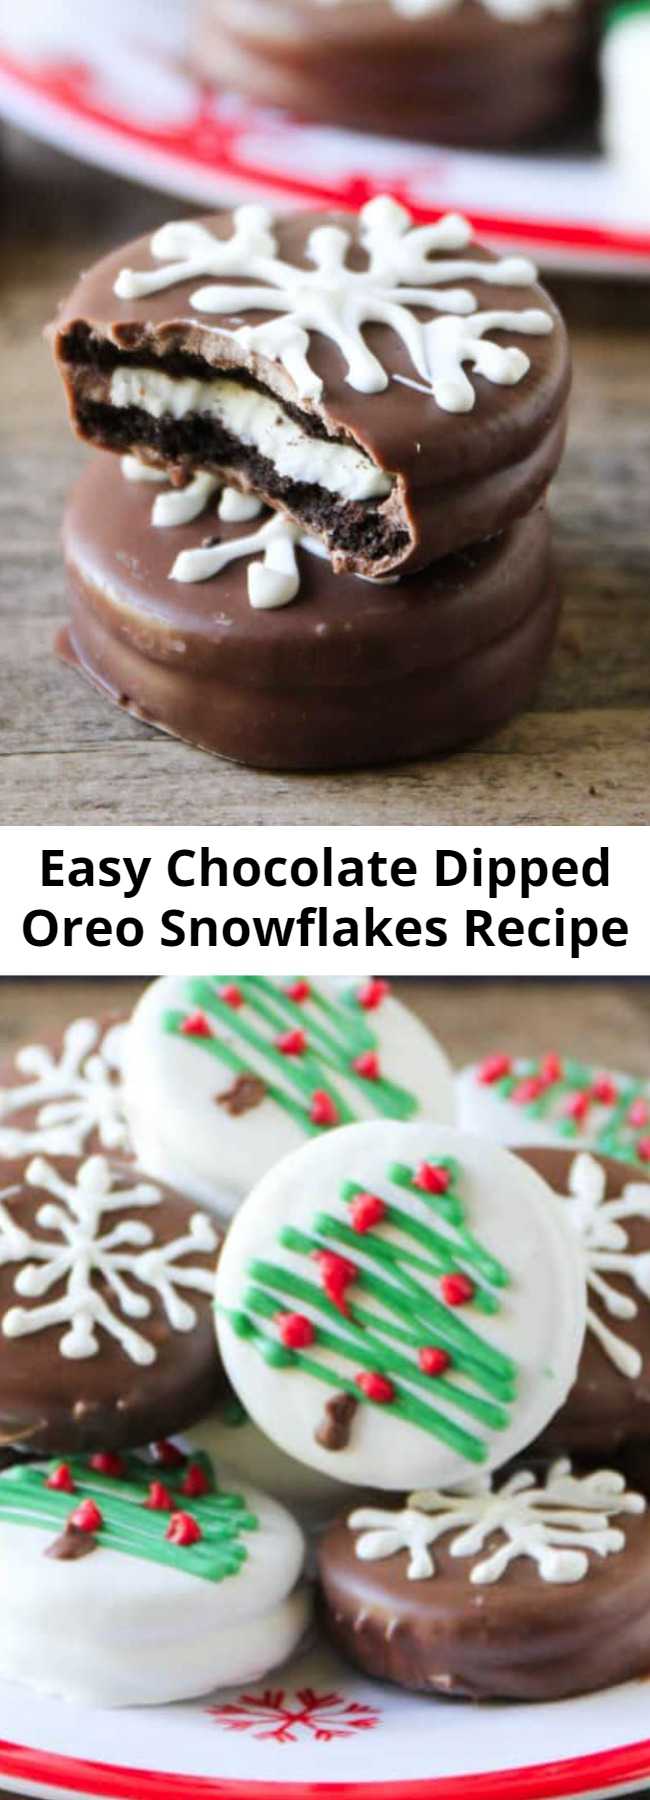 Easy Chocolate Dipped Oreo Snowflakes Recipe - These chocolate dipped Oreo snowflakes are adorable and easy treats the whole family can help make! Only takes 2 ingredients to make.